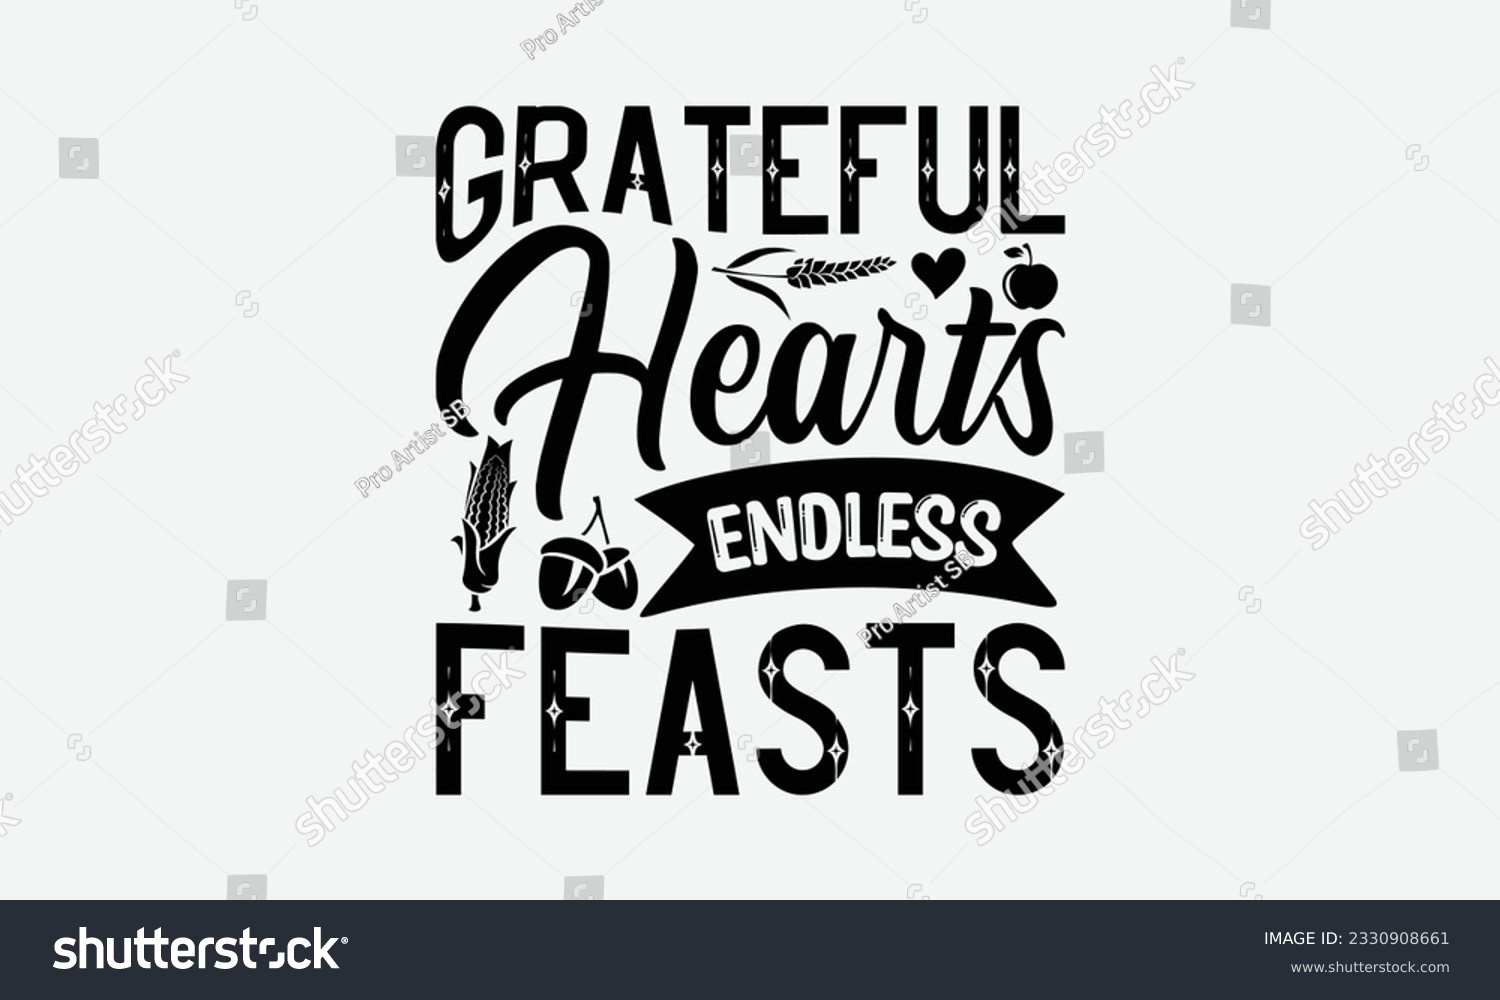 SVG of Grateful Hearts Endless Feasts - Thanksgiving T-shirt Design Template, Thanksgiving Quotes File, Hand Drawn Lettering Phrase, SVG Files for Cutting Cricut and Silhouette. svg